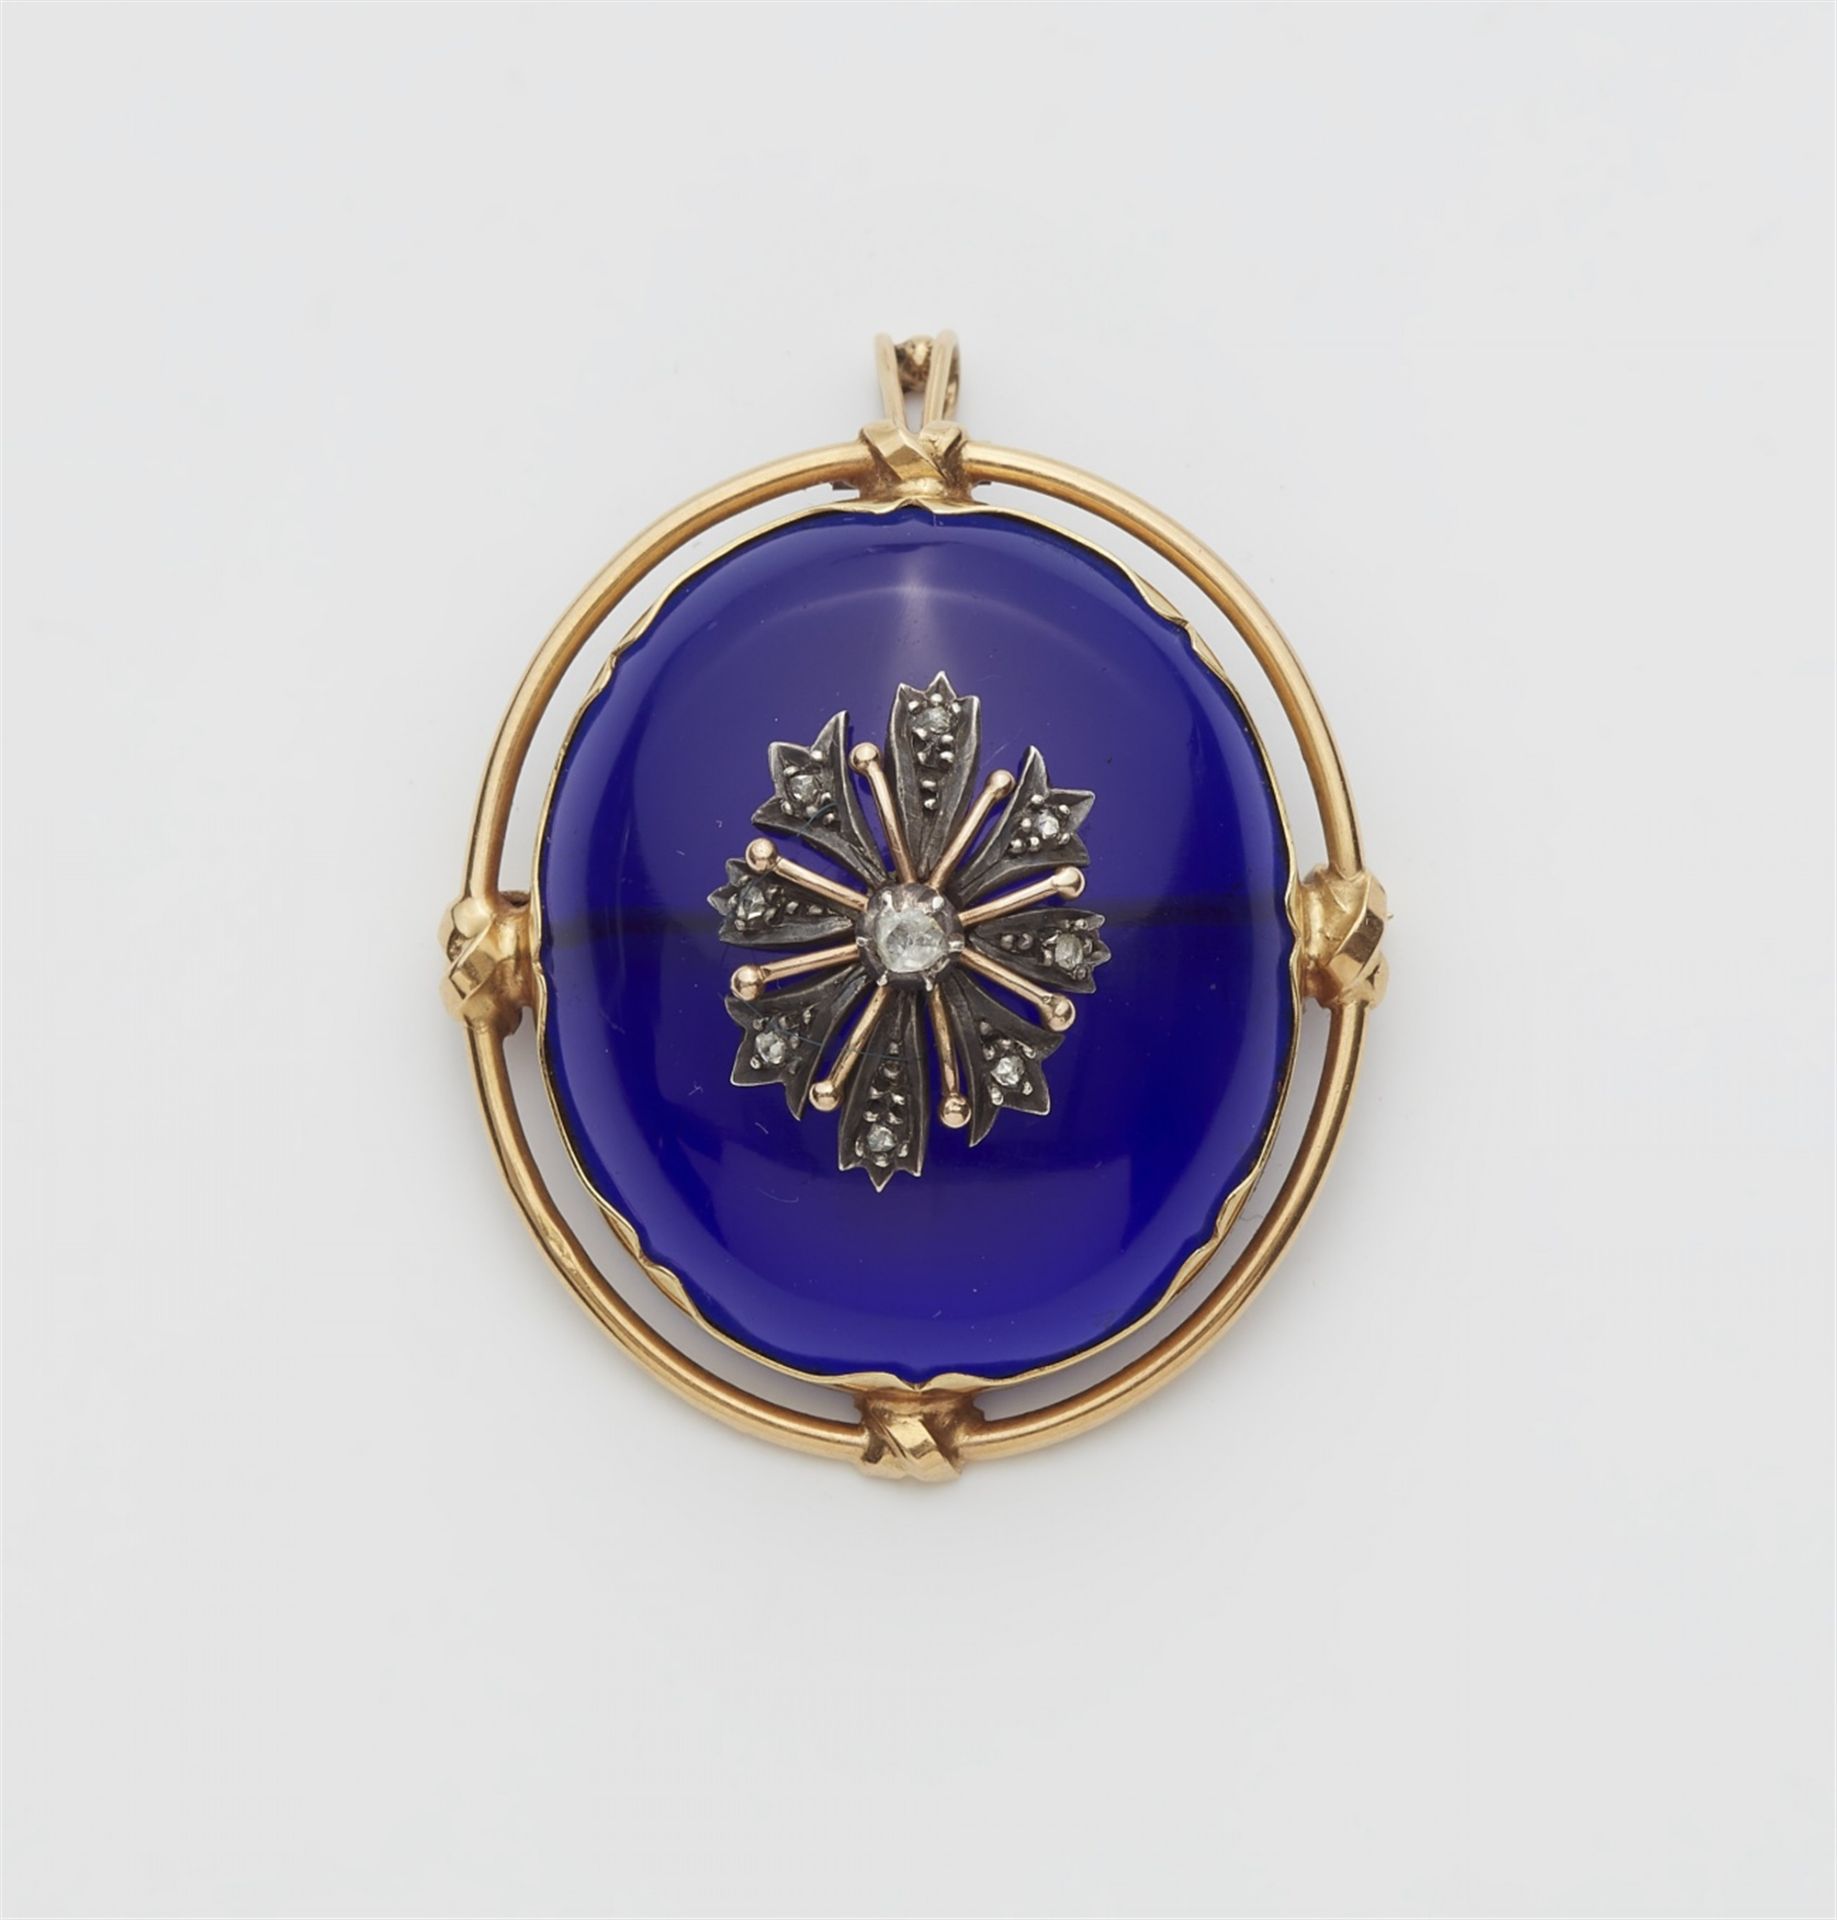 A 14k gold pendant brooch with a blue paste cabochon